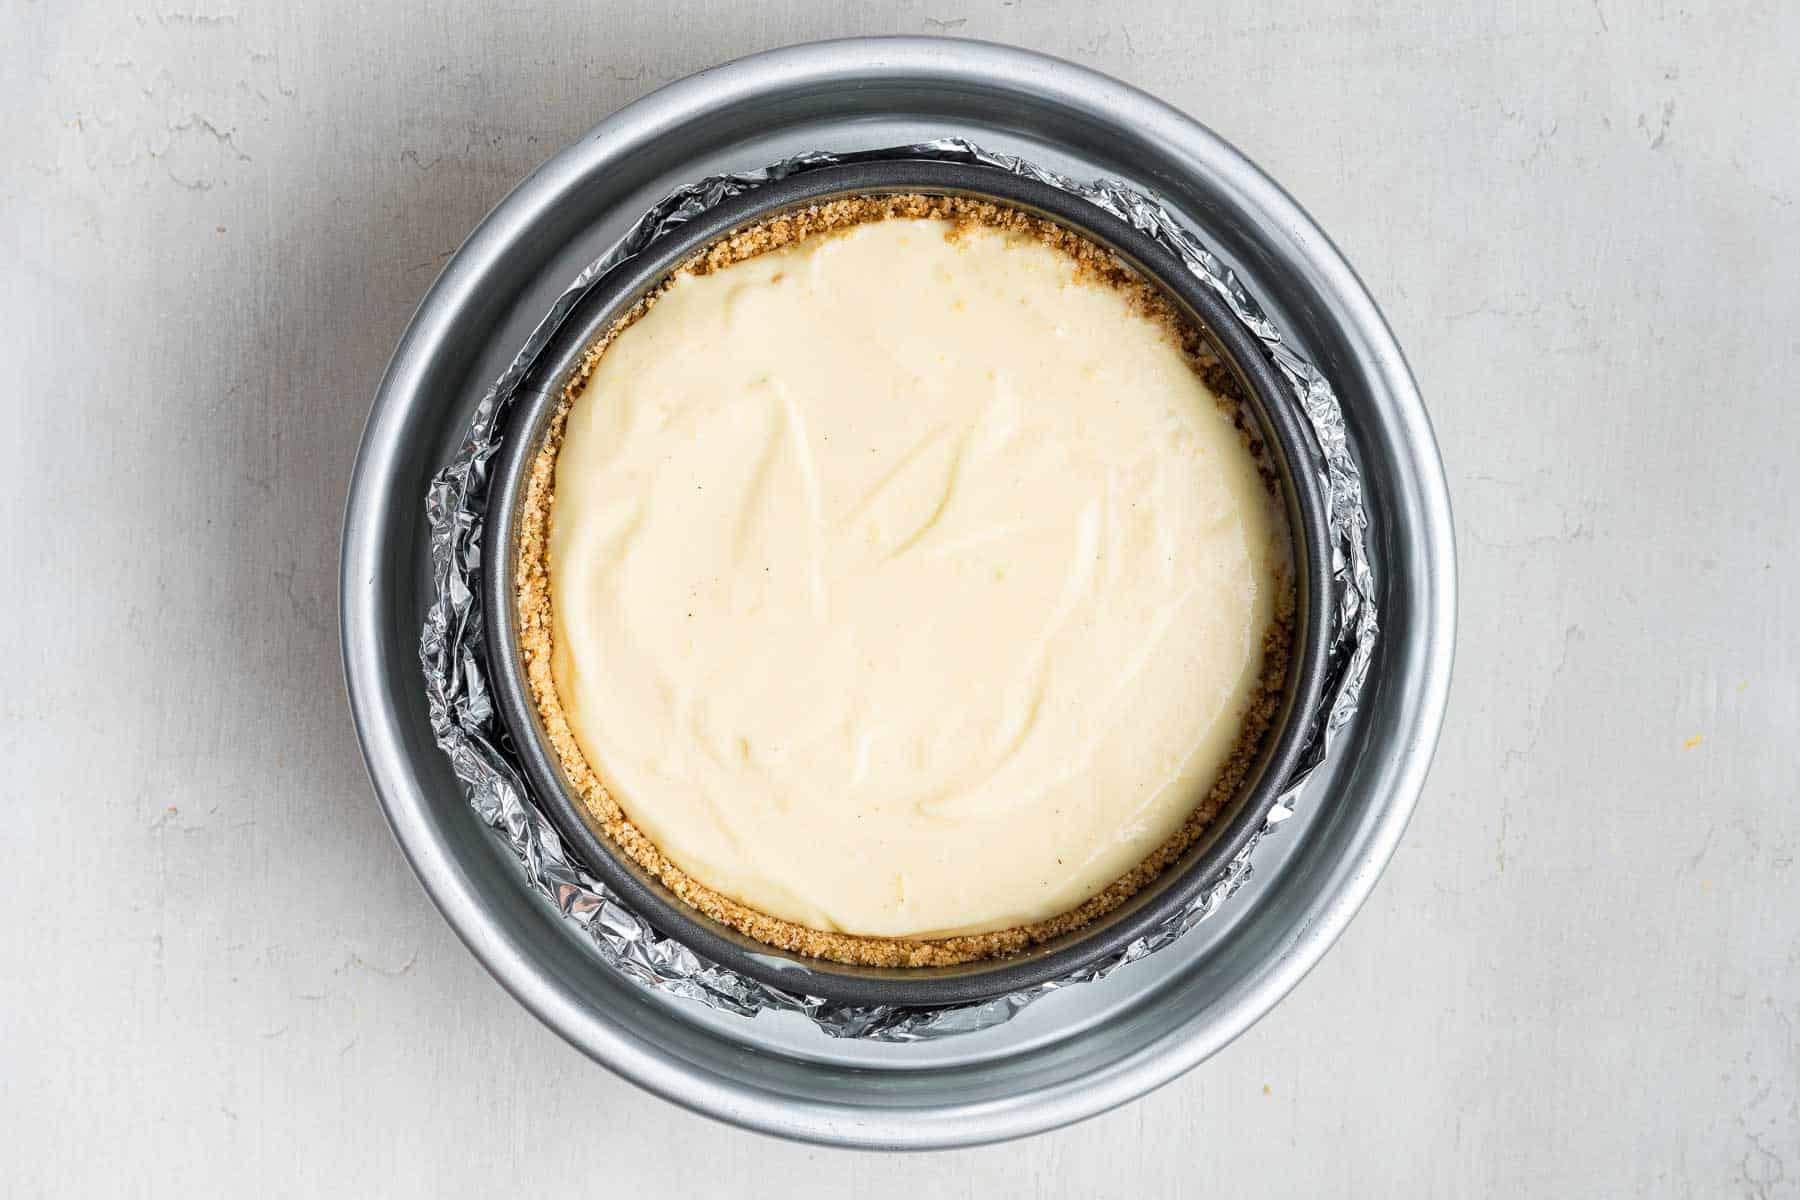 A 6 inch cheesecake recipe in a round pan with a water bath.